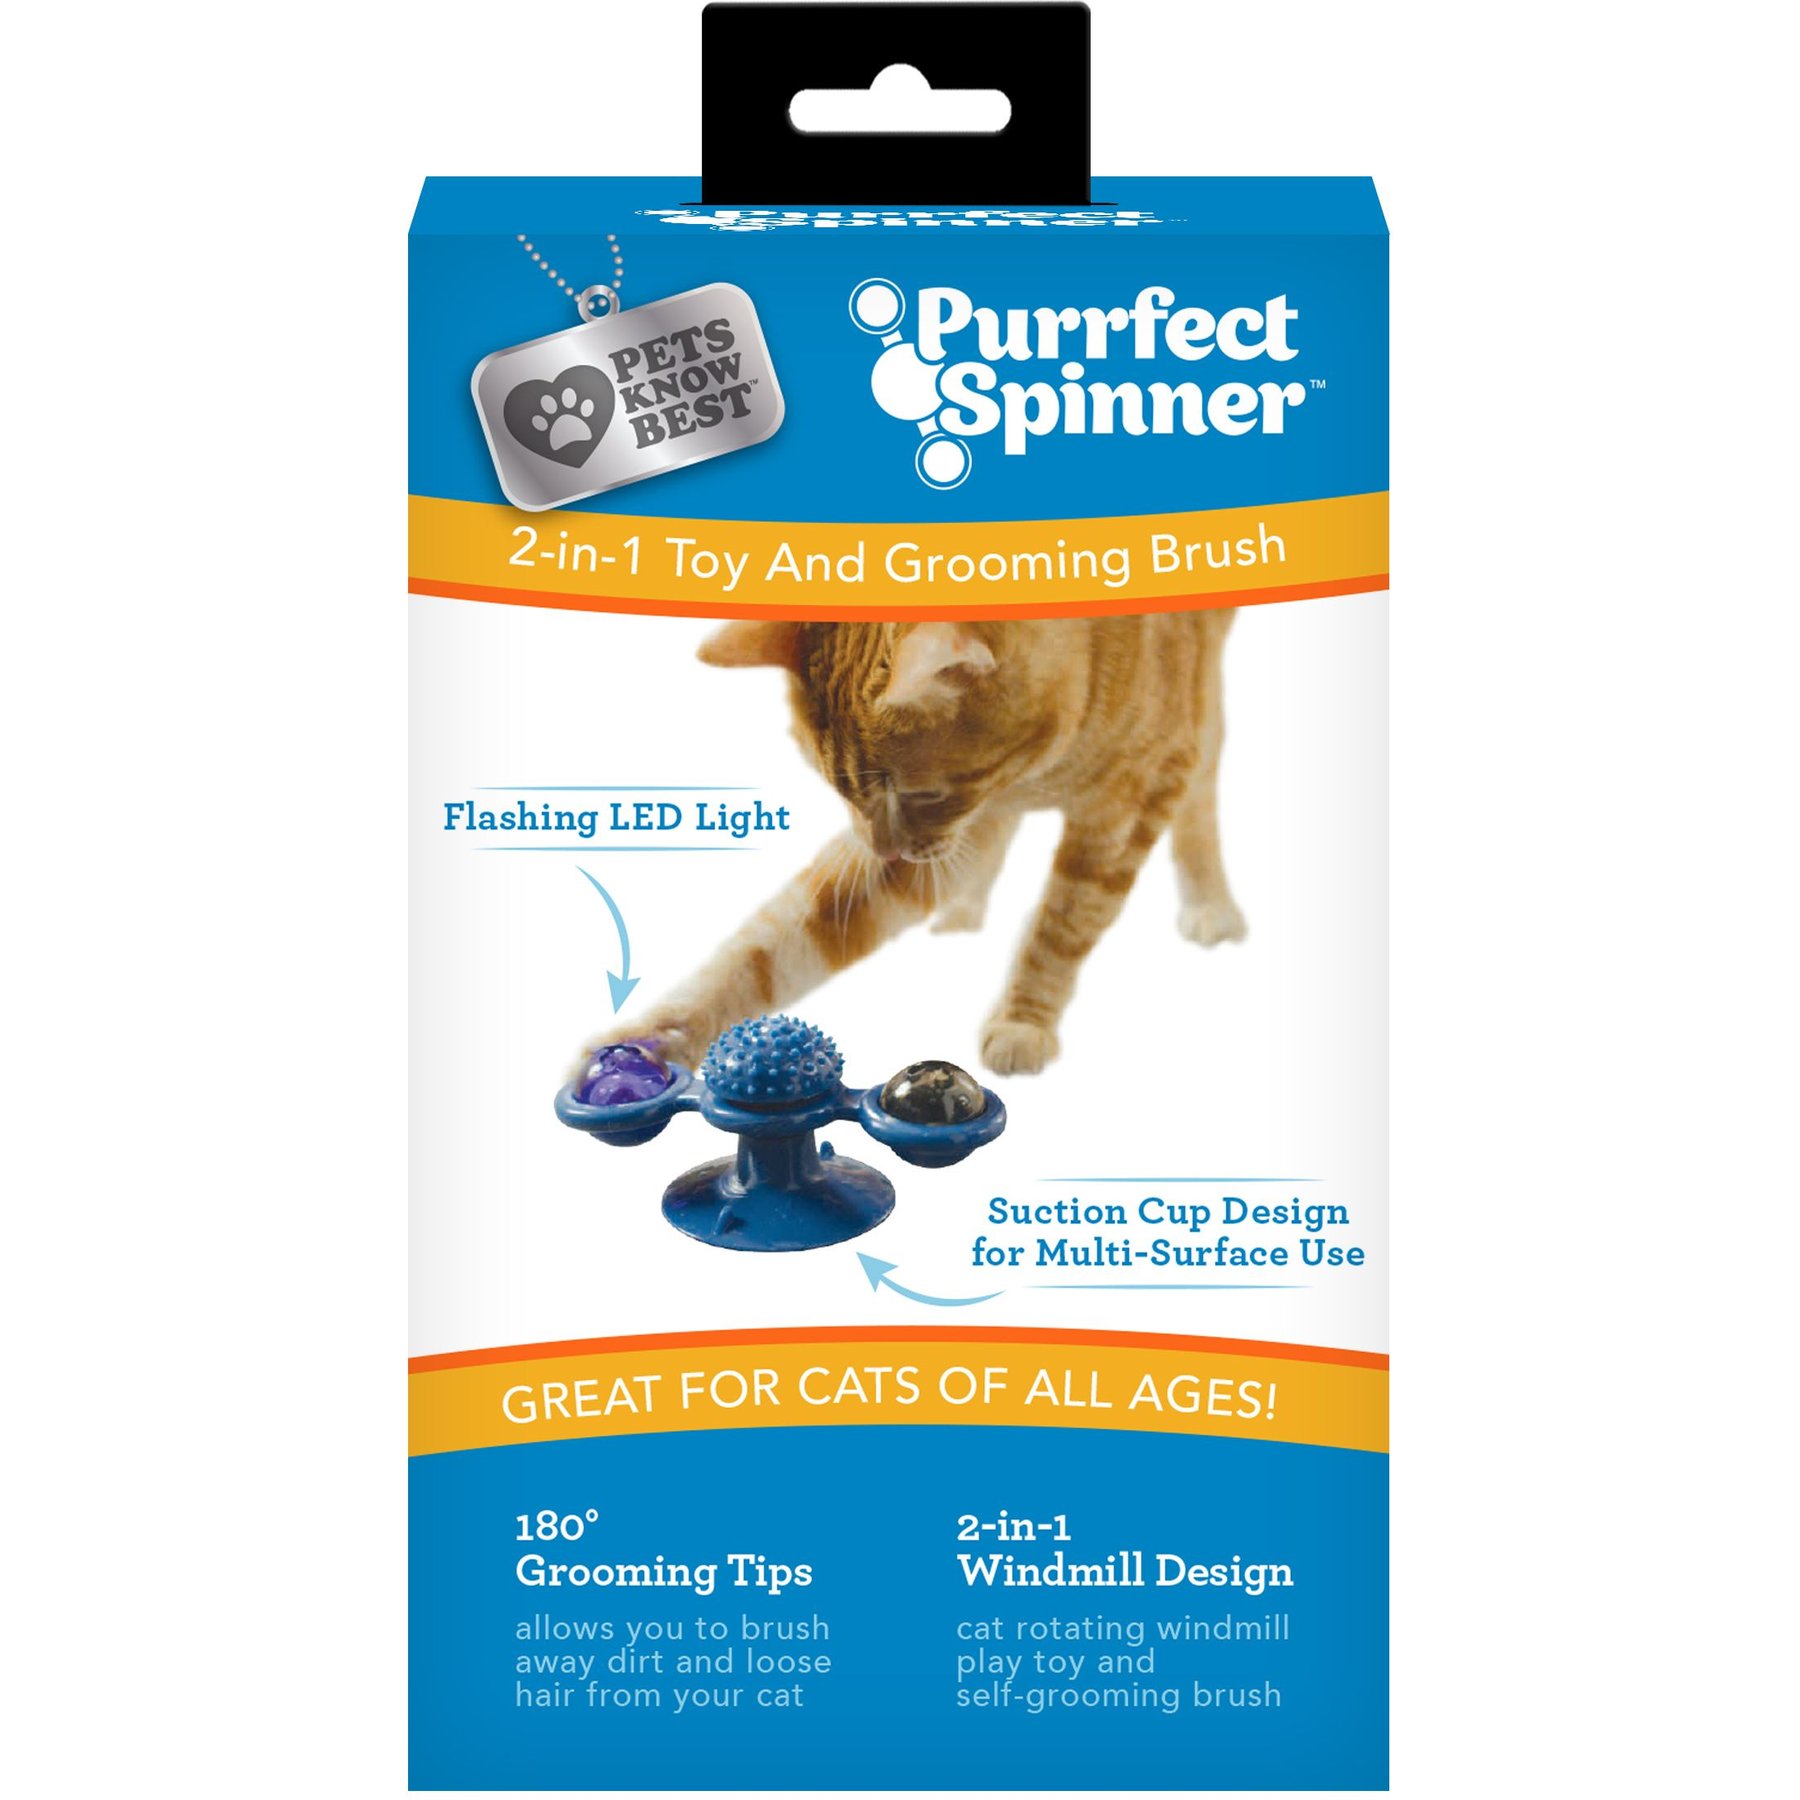 Catstages Tower of Tracks Cat Toy, 3 count